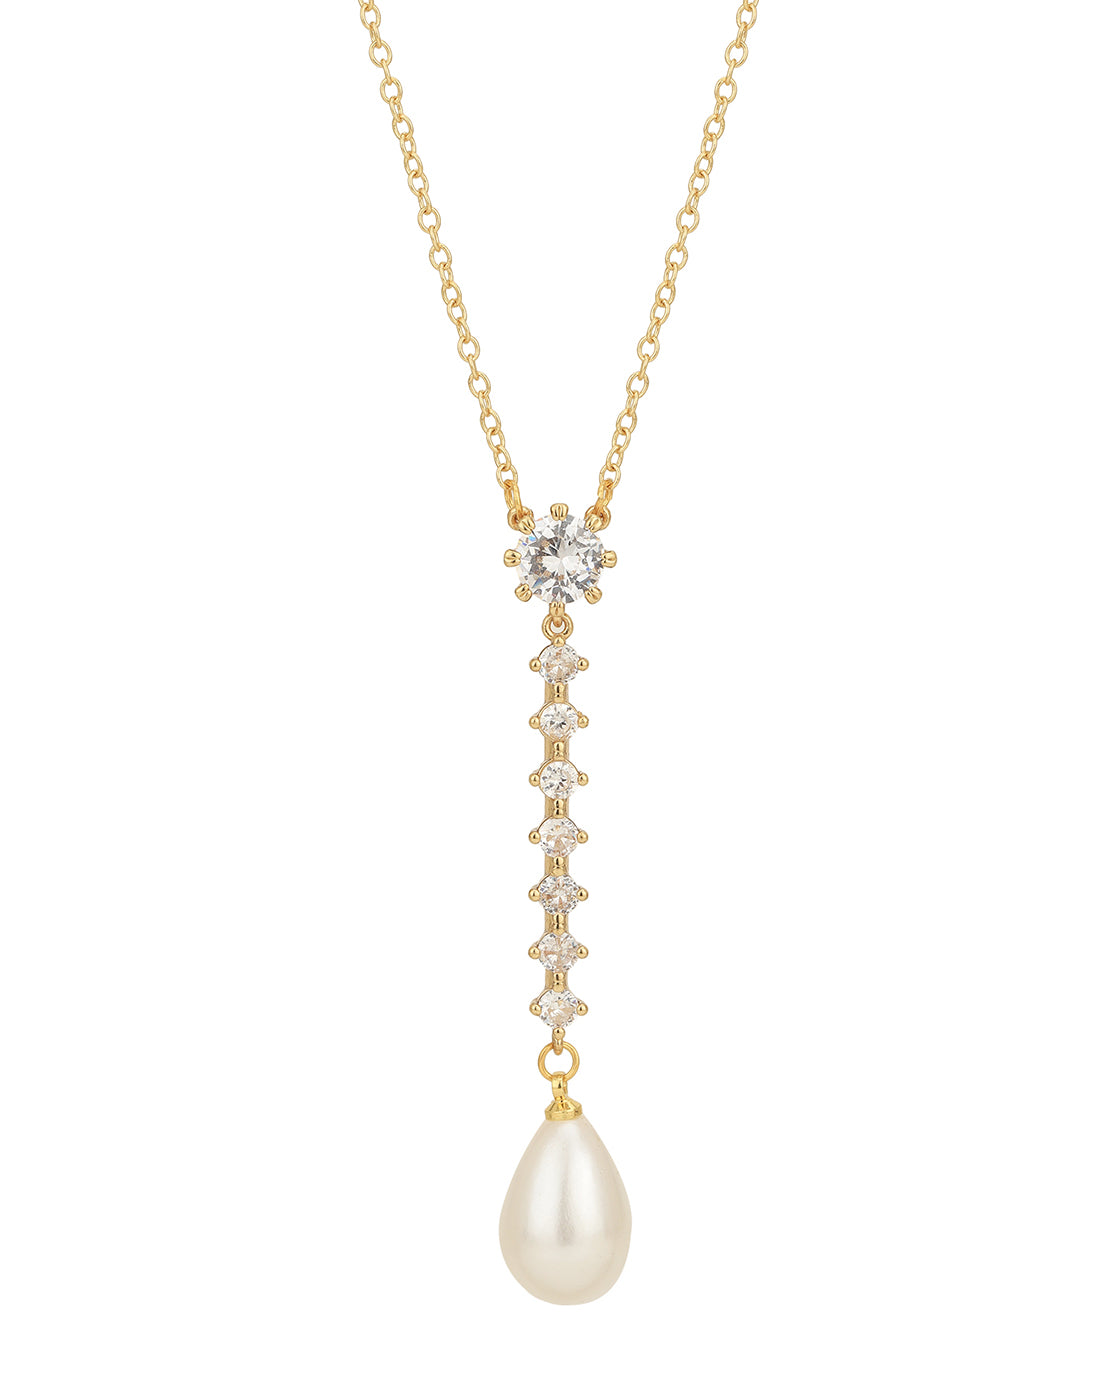 Premium Gold Plated Hanging Pearl Lariat Necklace for women